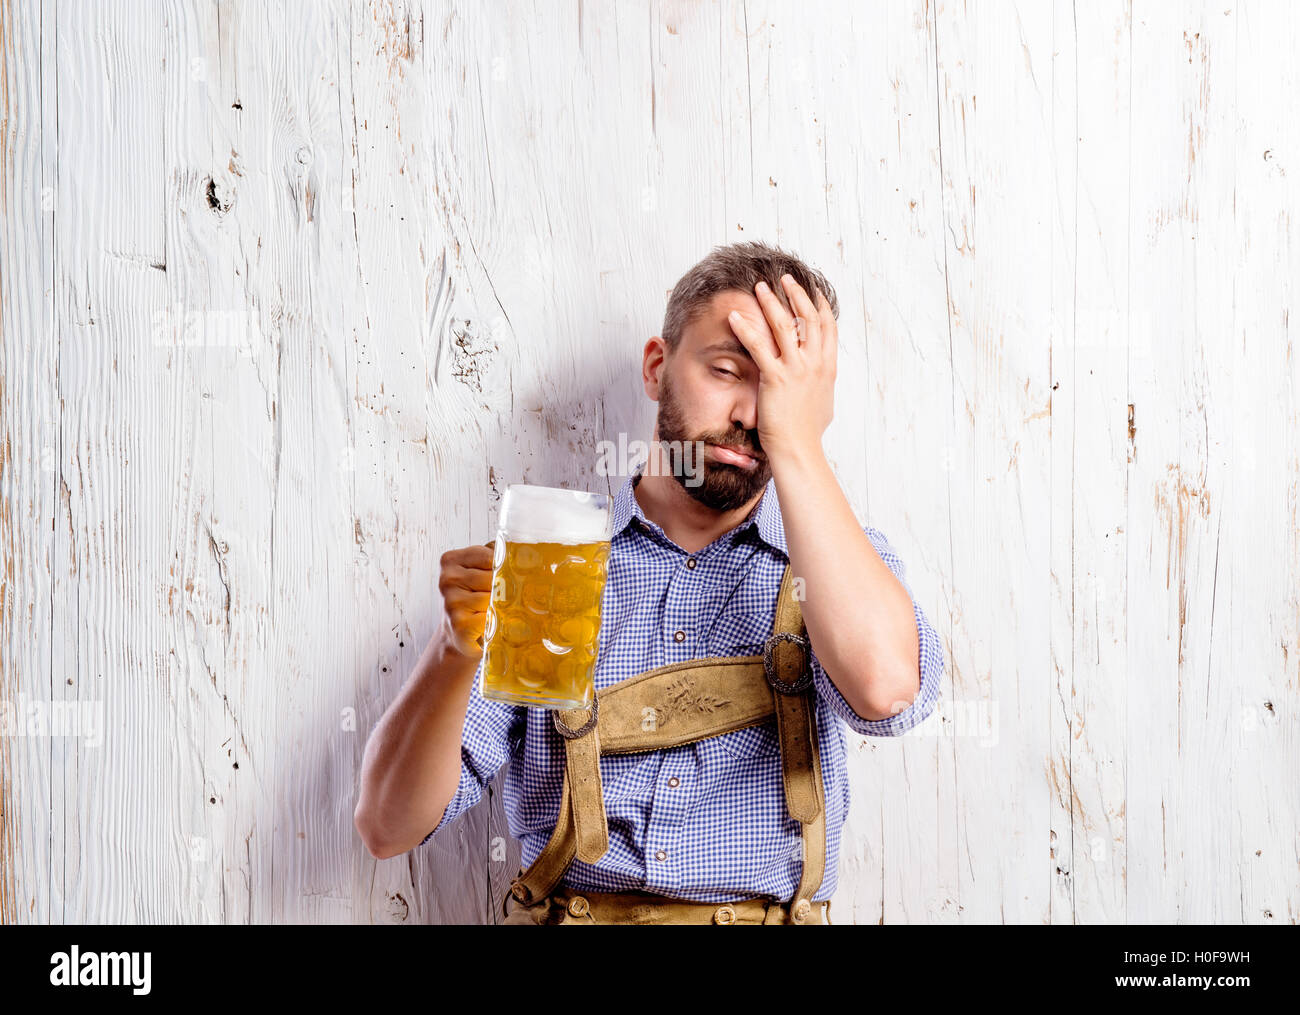 Drunk man in traditional bavarian clothes holding beer mugs Stock Photo